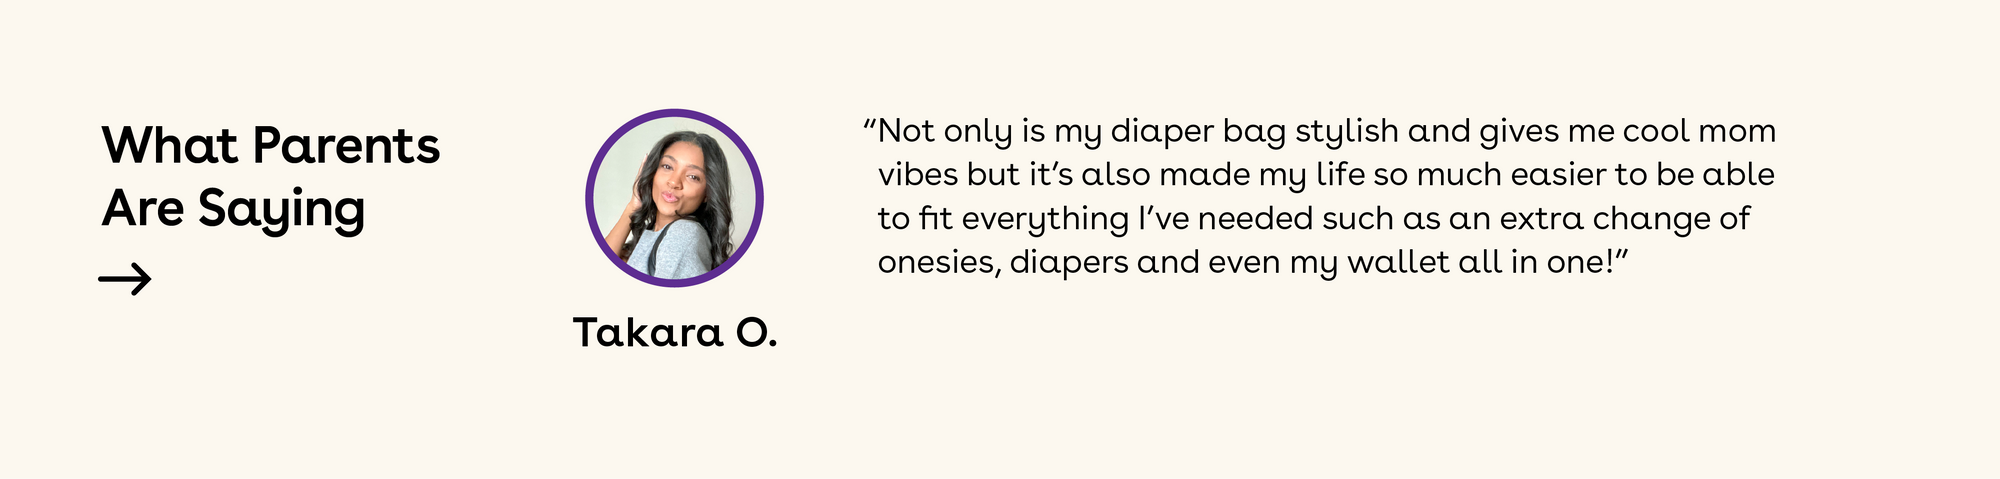 What parents are saying. not only is my diaper bag stylish and gives me cool mom vibes but it has also made my life so much easier to be able to fit everything i have needed such as extra onesies diapers and even my wallet all in one.